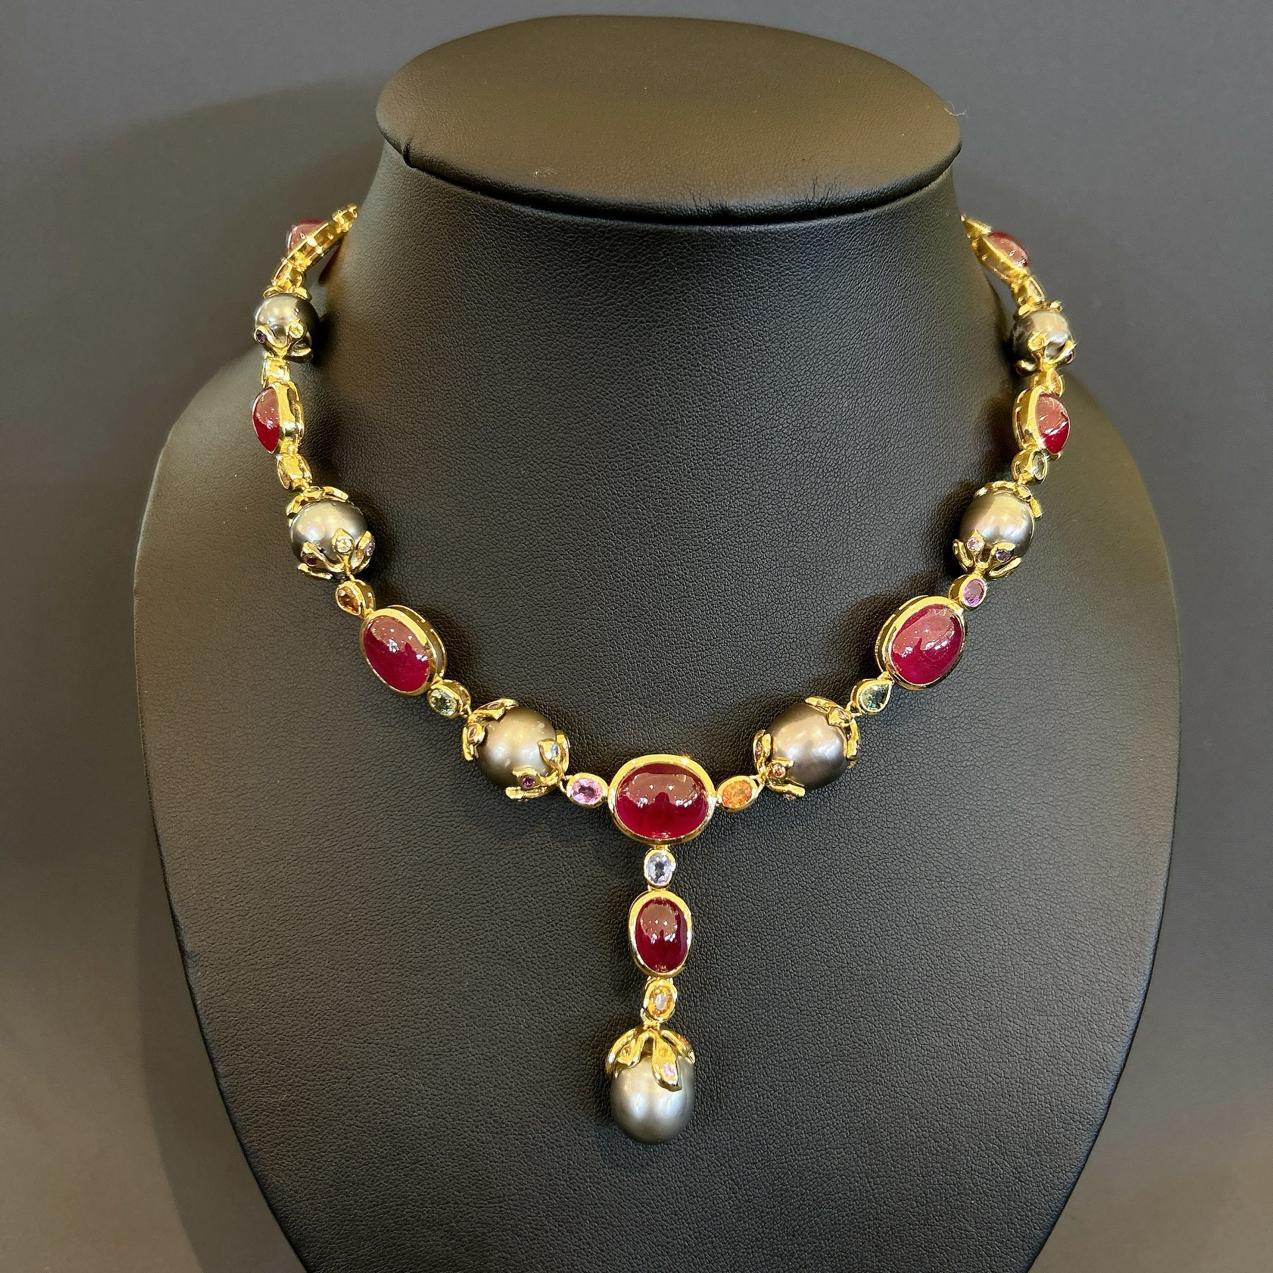 Bochic “Baroque” Ruby, Sapphire & Tahiti pearl Set In 18K Gold and silver 

Natural Red Ruby 54 Carats 
South Sea Oval shape Tahiti Pearls 
Natural Sapphires - 9 Carats 
18K Yellow Gold

This Necklace is from the 